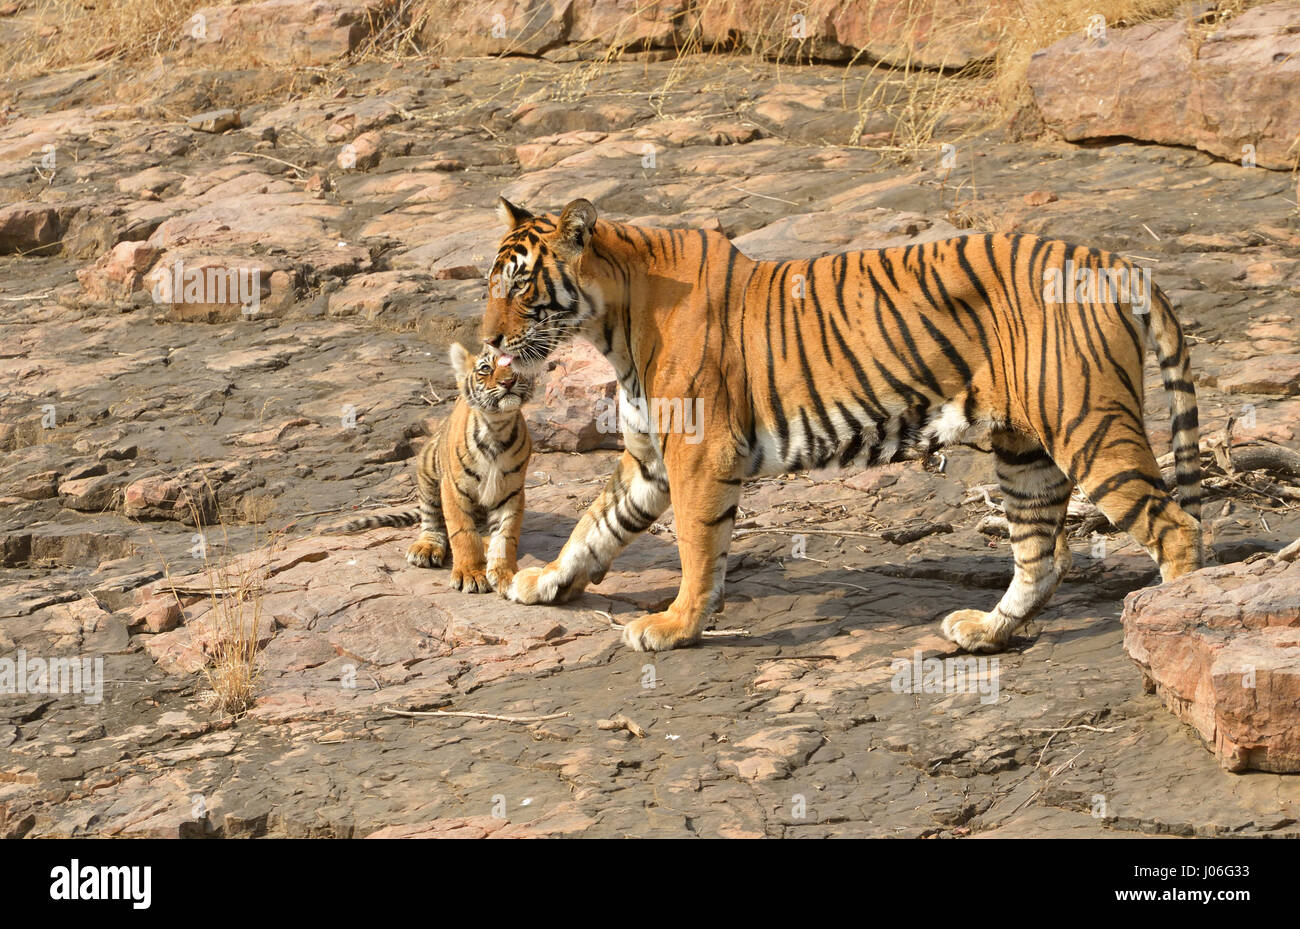 Bengal tiger, mother and cub, walking on a rocky outcrop in Ranthambhore tiger reserve, India Stock Photo